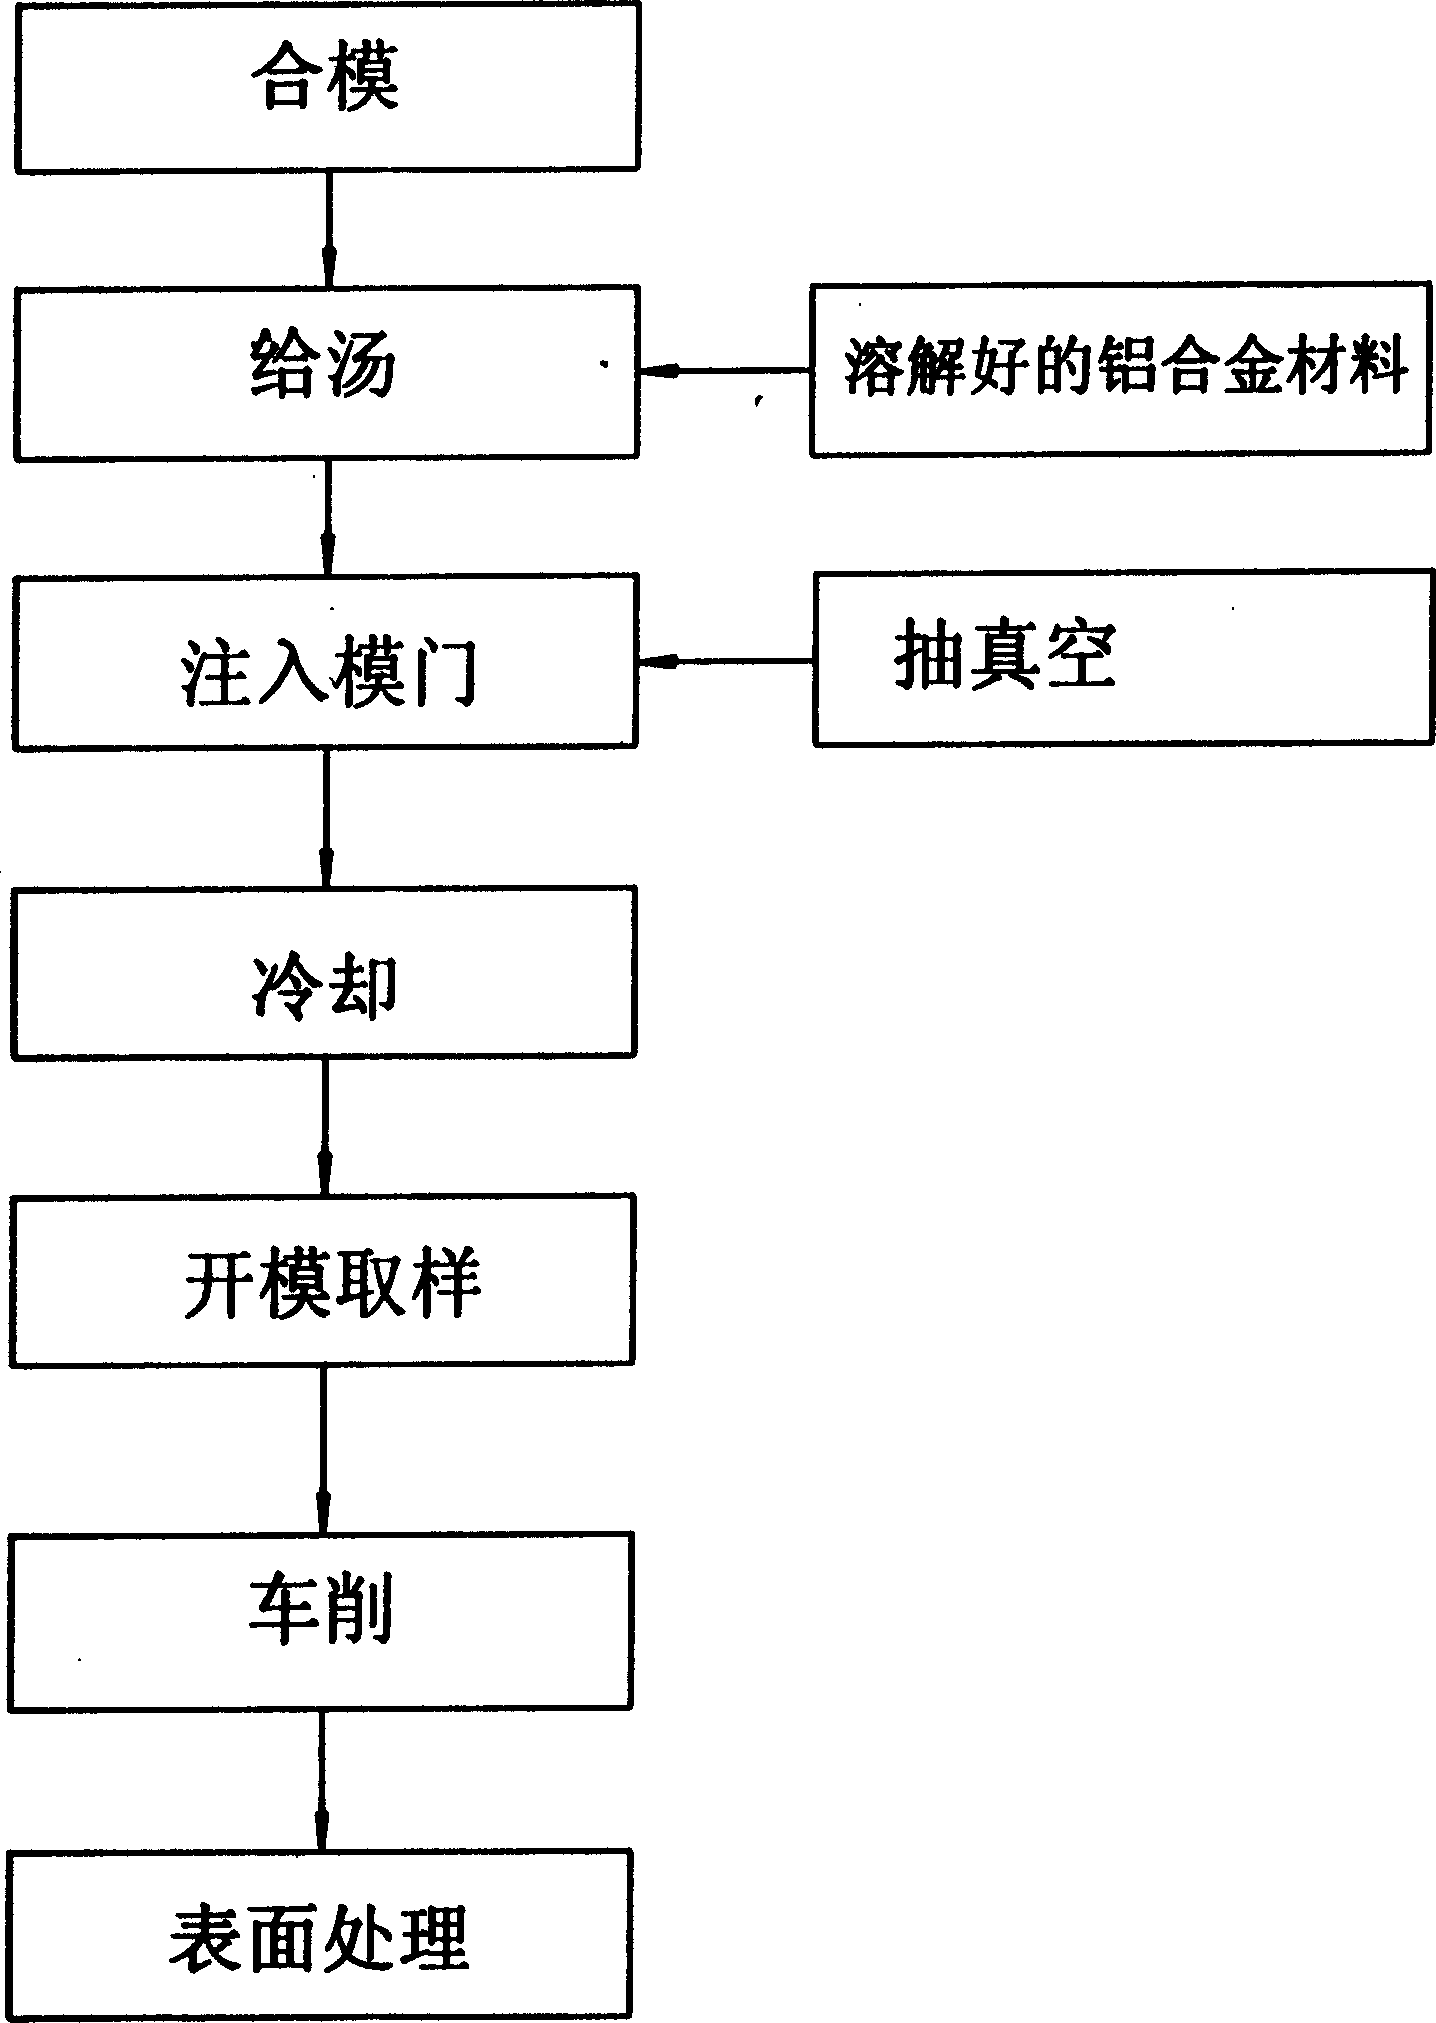 Production method of pressing casting fishing gear